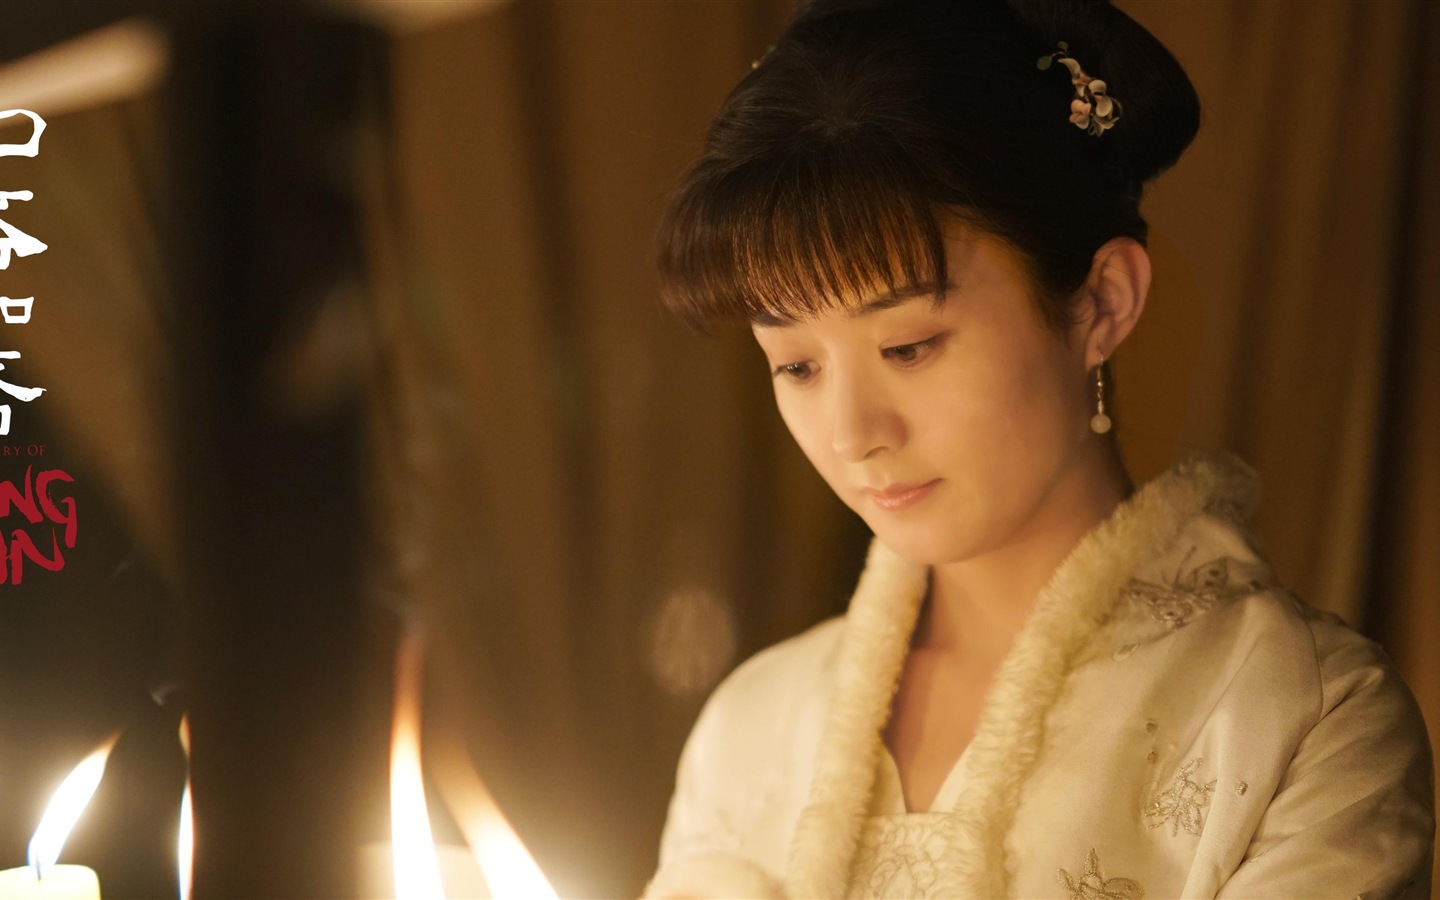 The Story Of MingLan, TV series HD wallpapers #41 - 1440x900